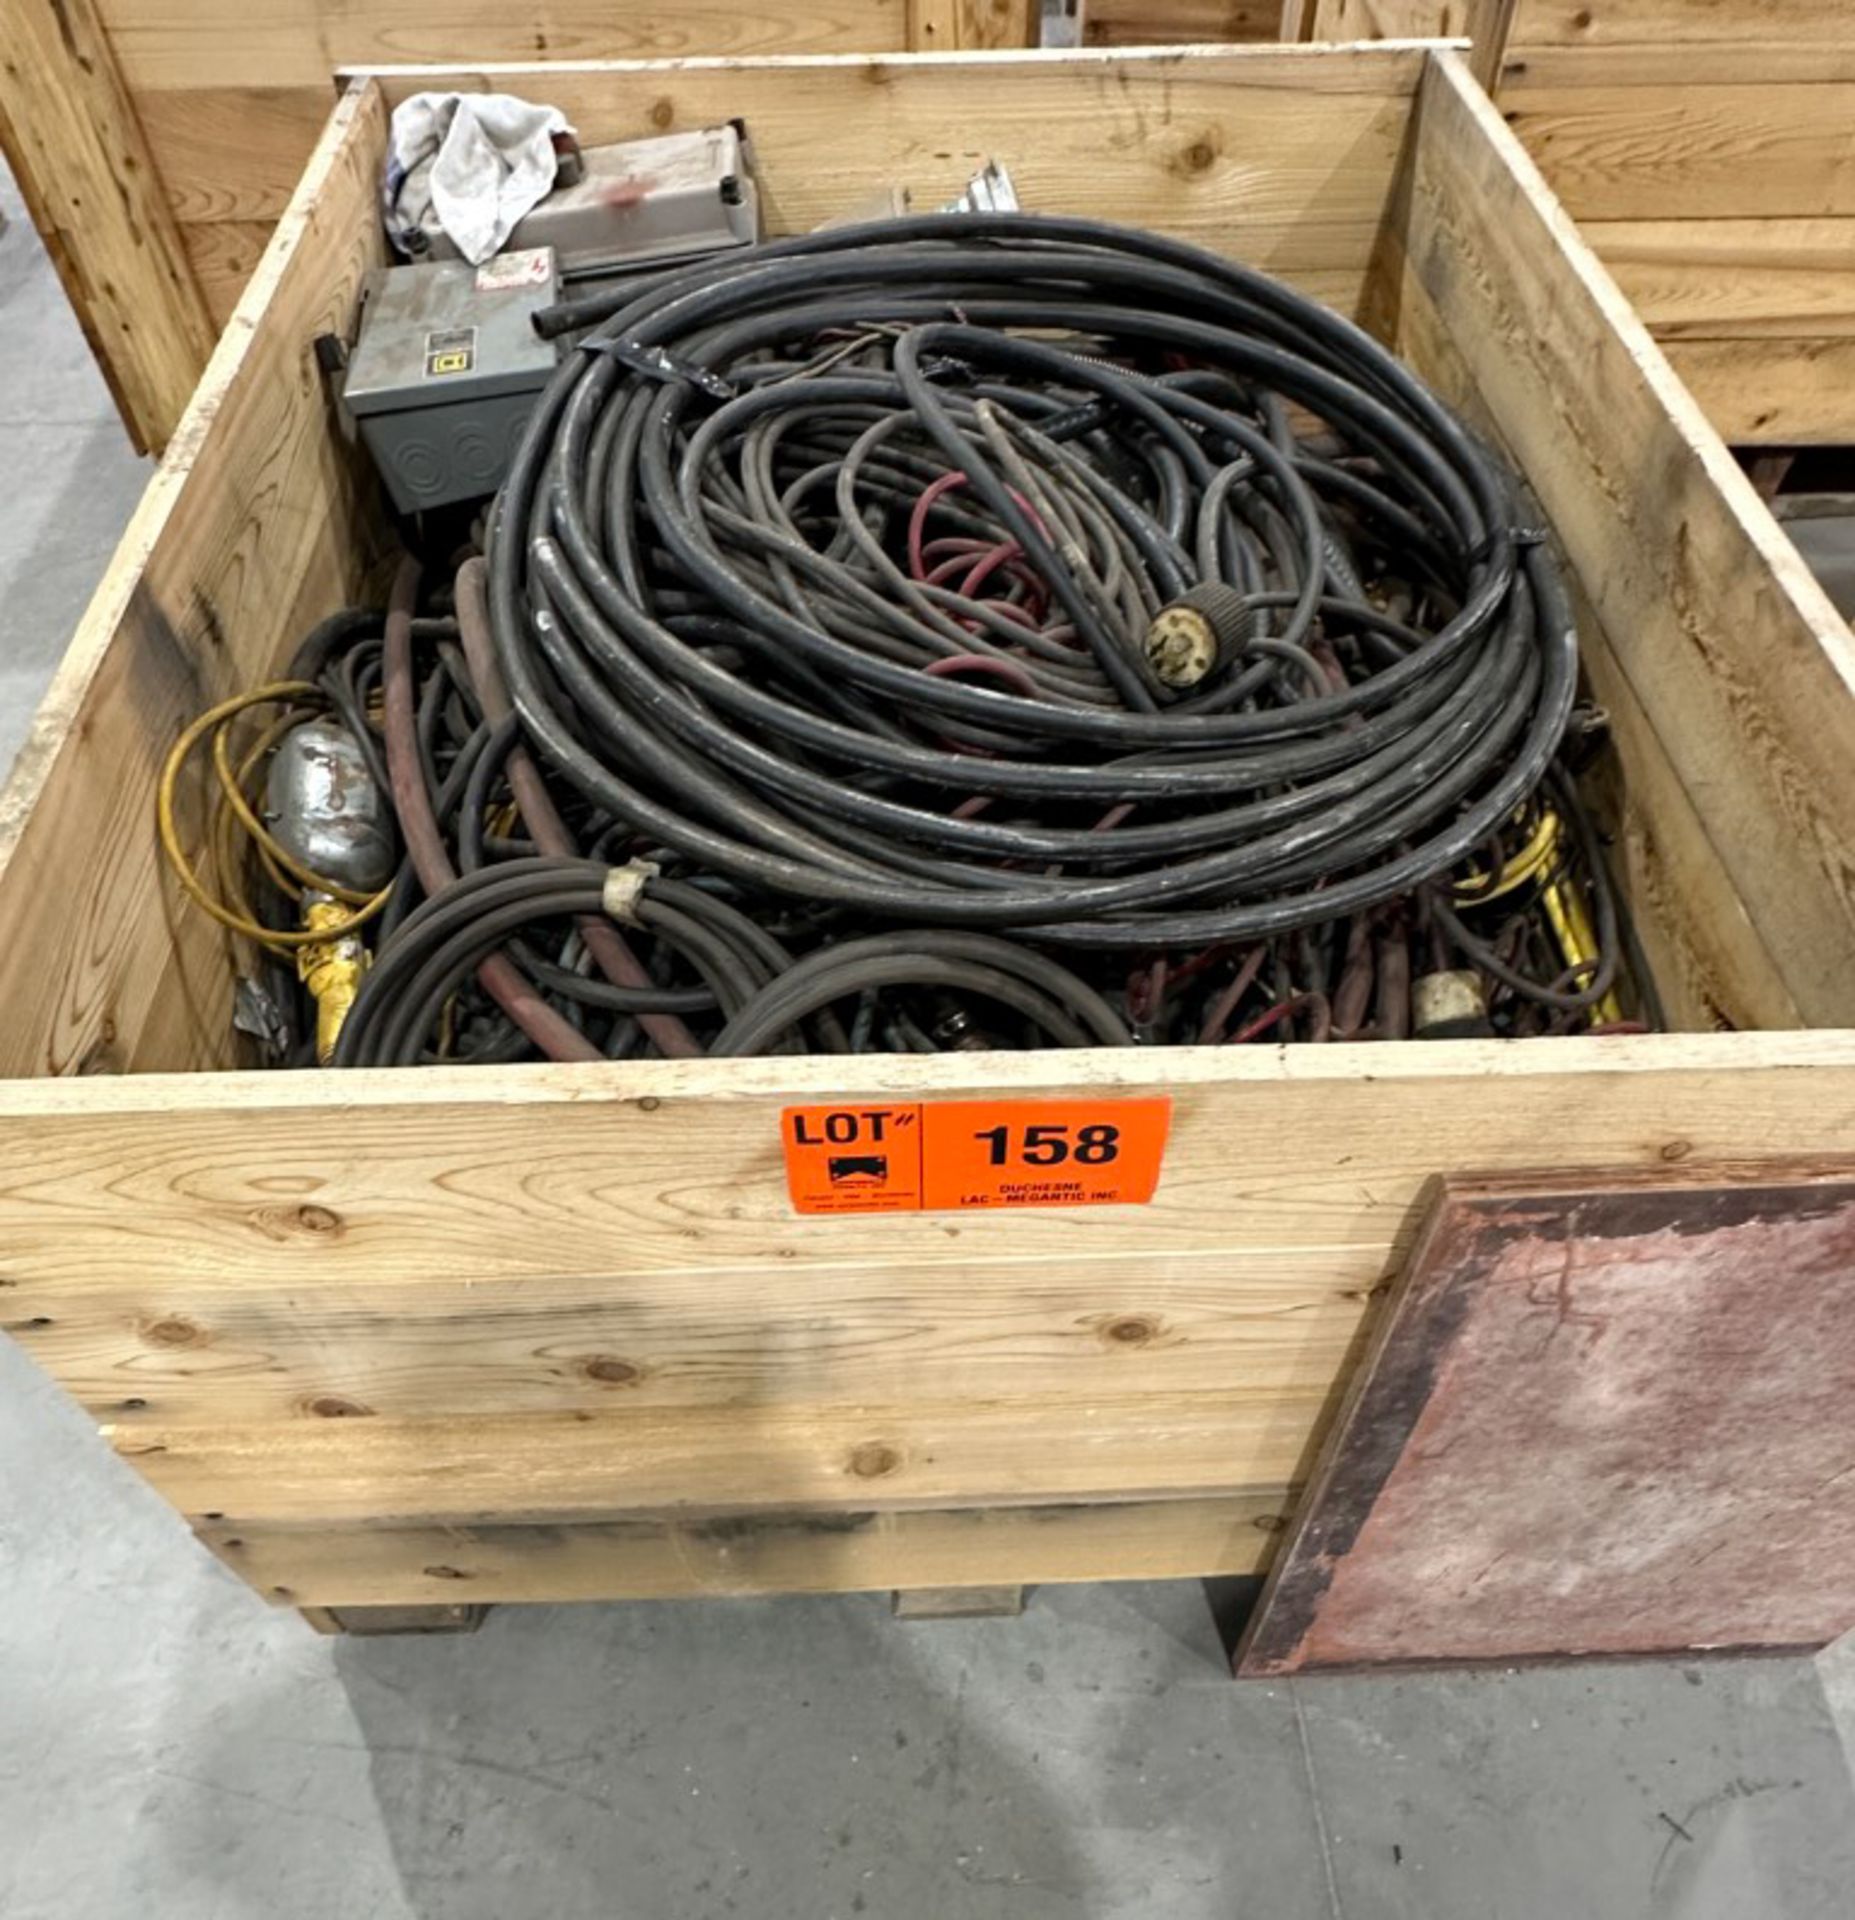 LOT/ skid and contents - extension cords and air lines